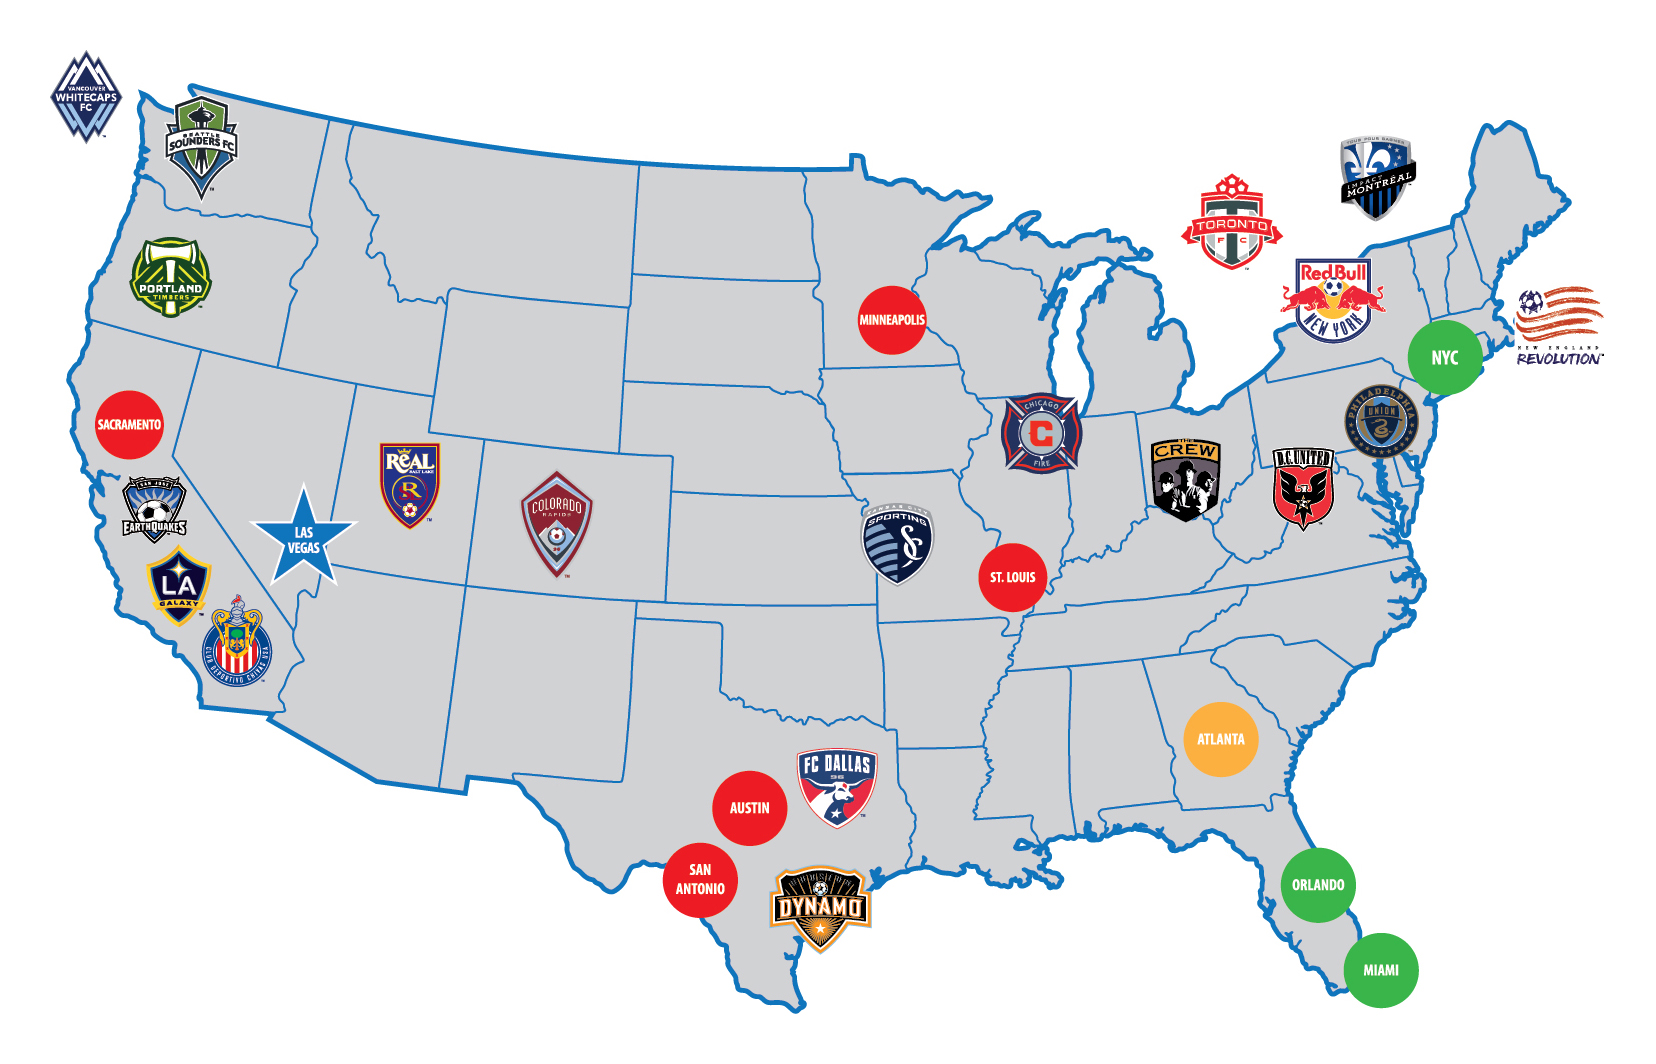 Distribution of MLS teams across the US and Canada. Source: http://weduse.ninja/mls/mls-soccer-map.html